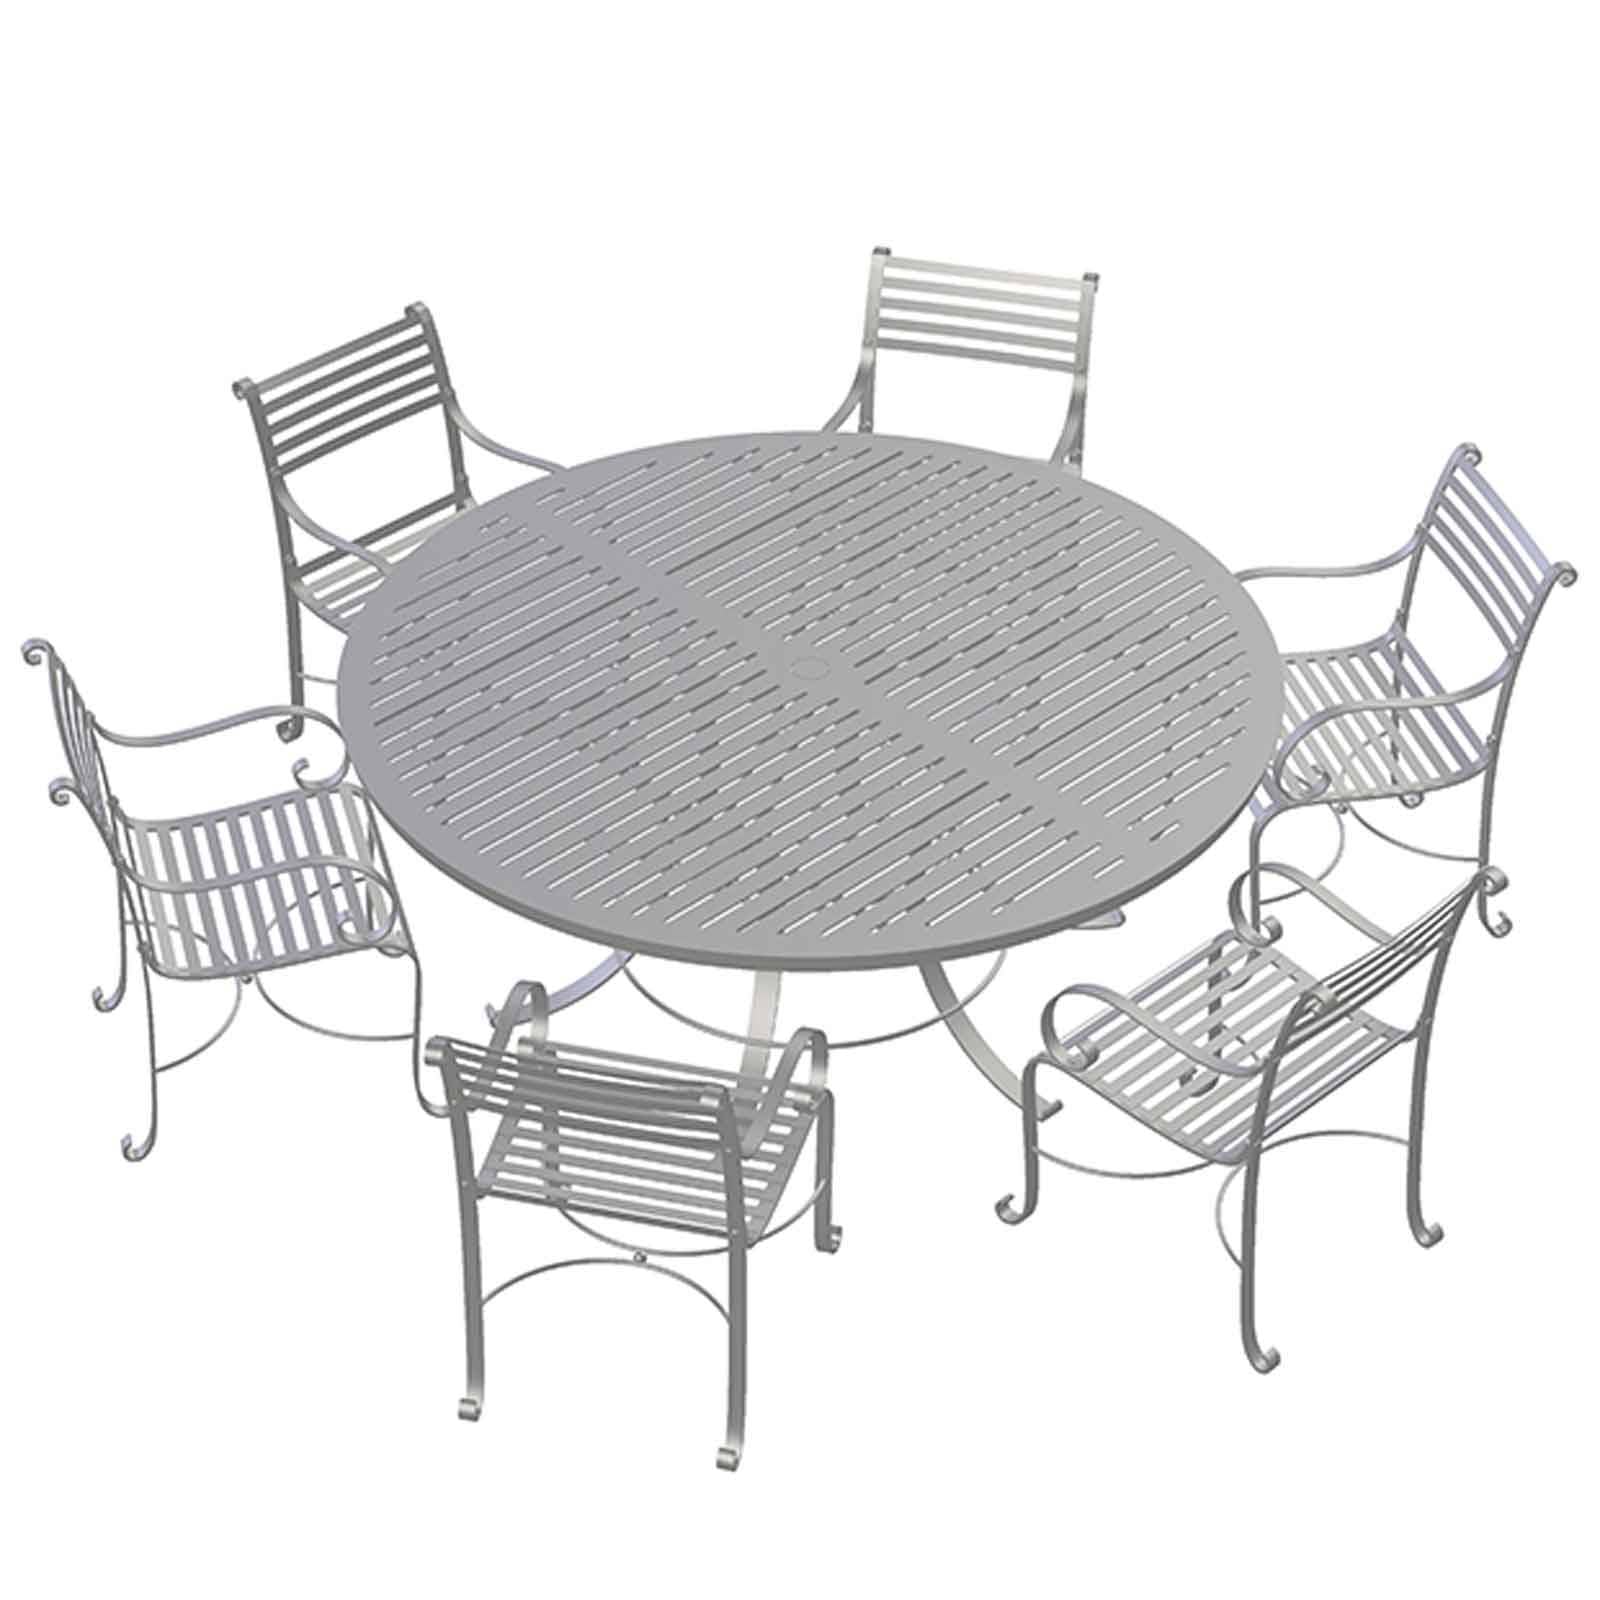 Round Table 1.8m 6 chairs render